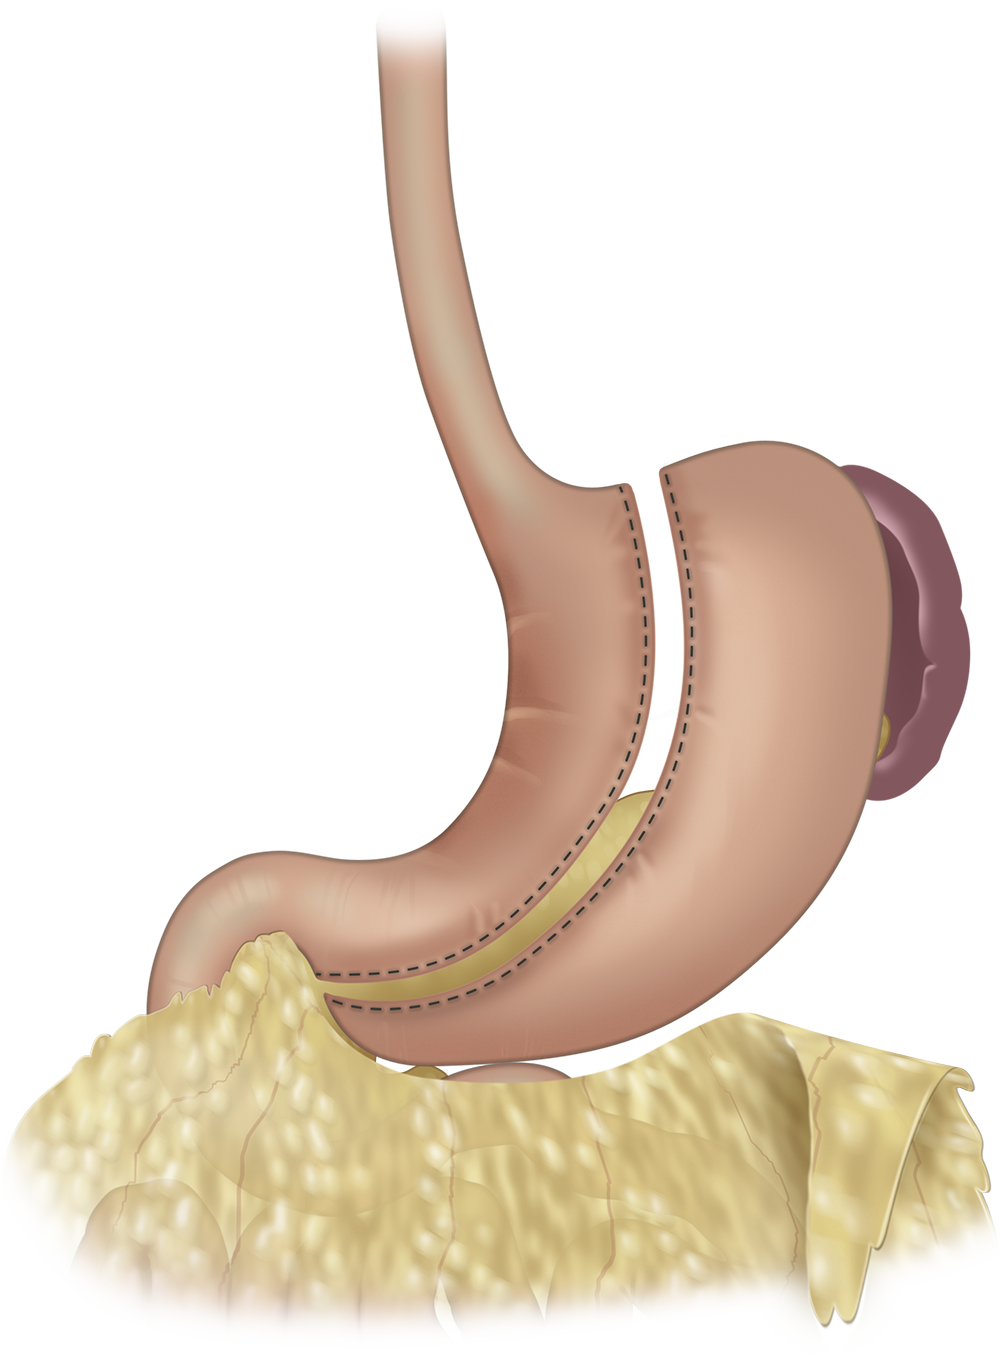 Illustration of Sleeve with omentum removed